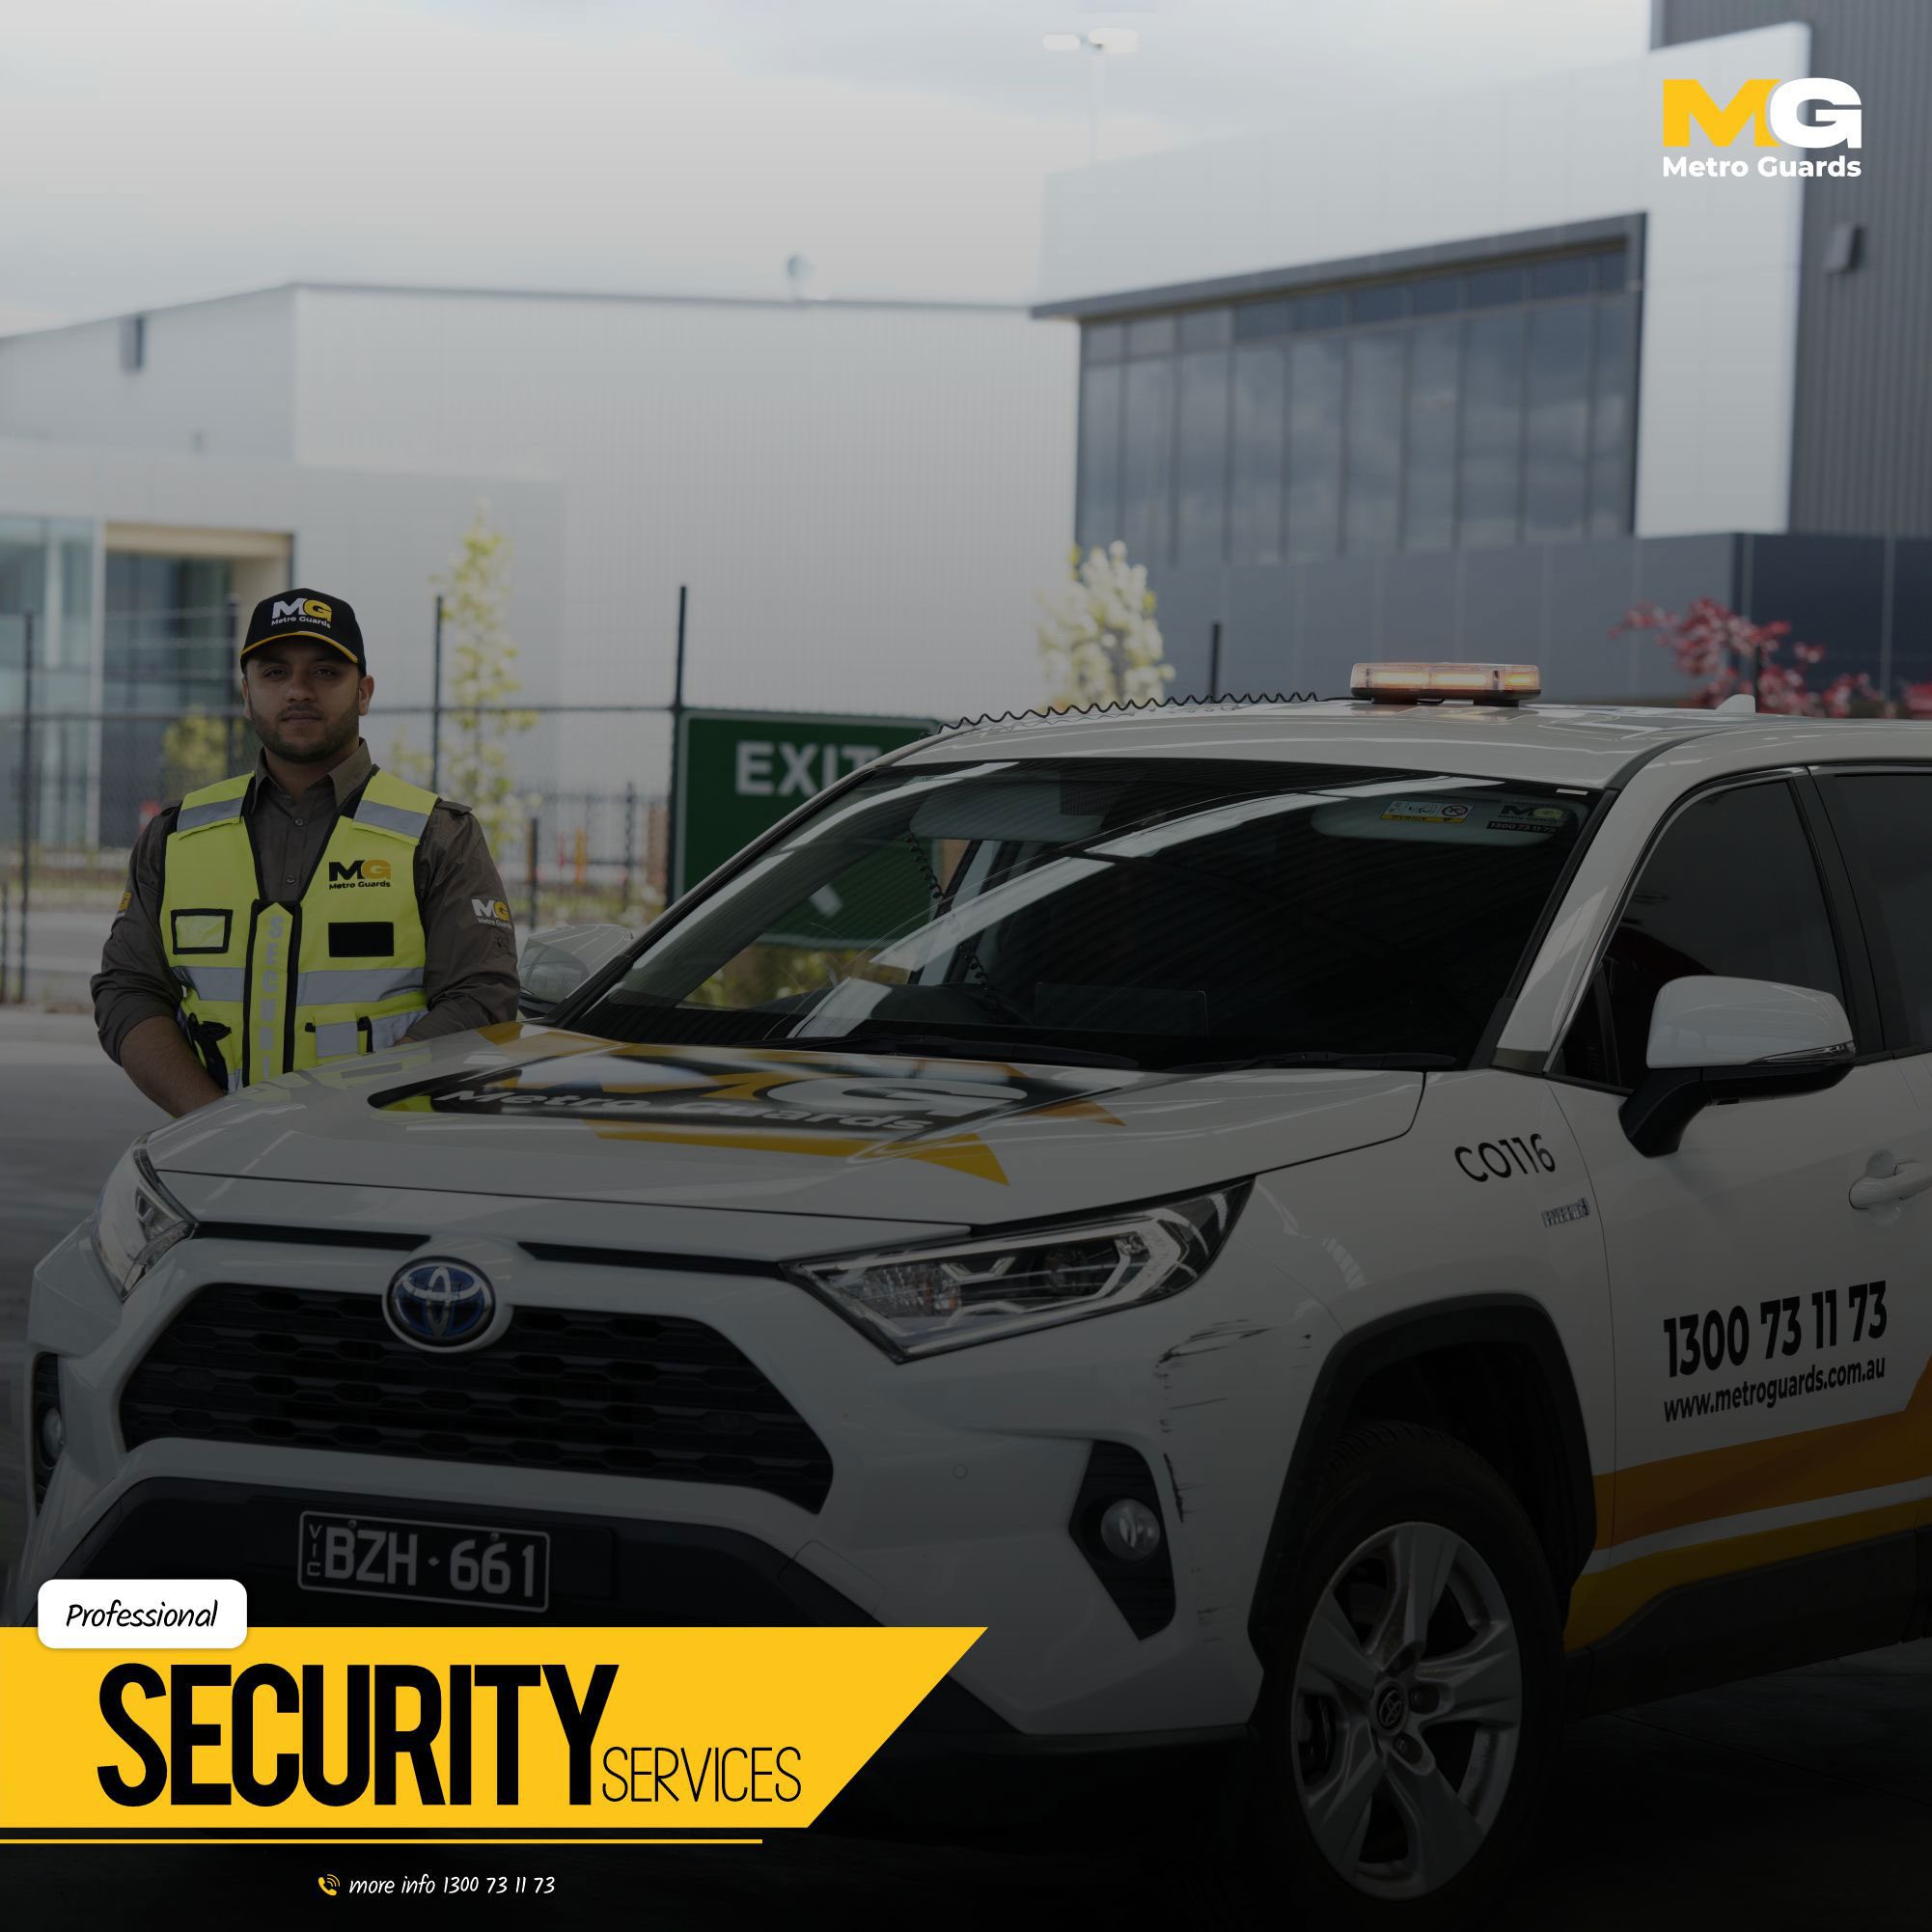 Hire Security Guard Melbourne | Expert Security Services | Metro Guards